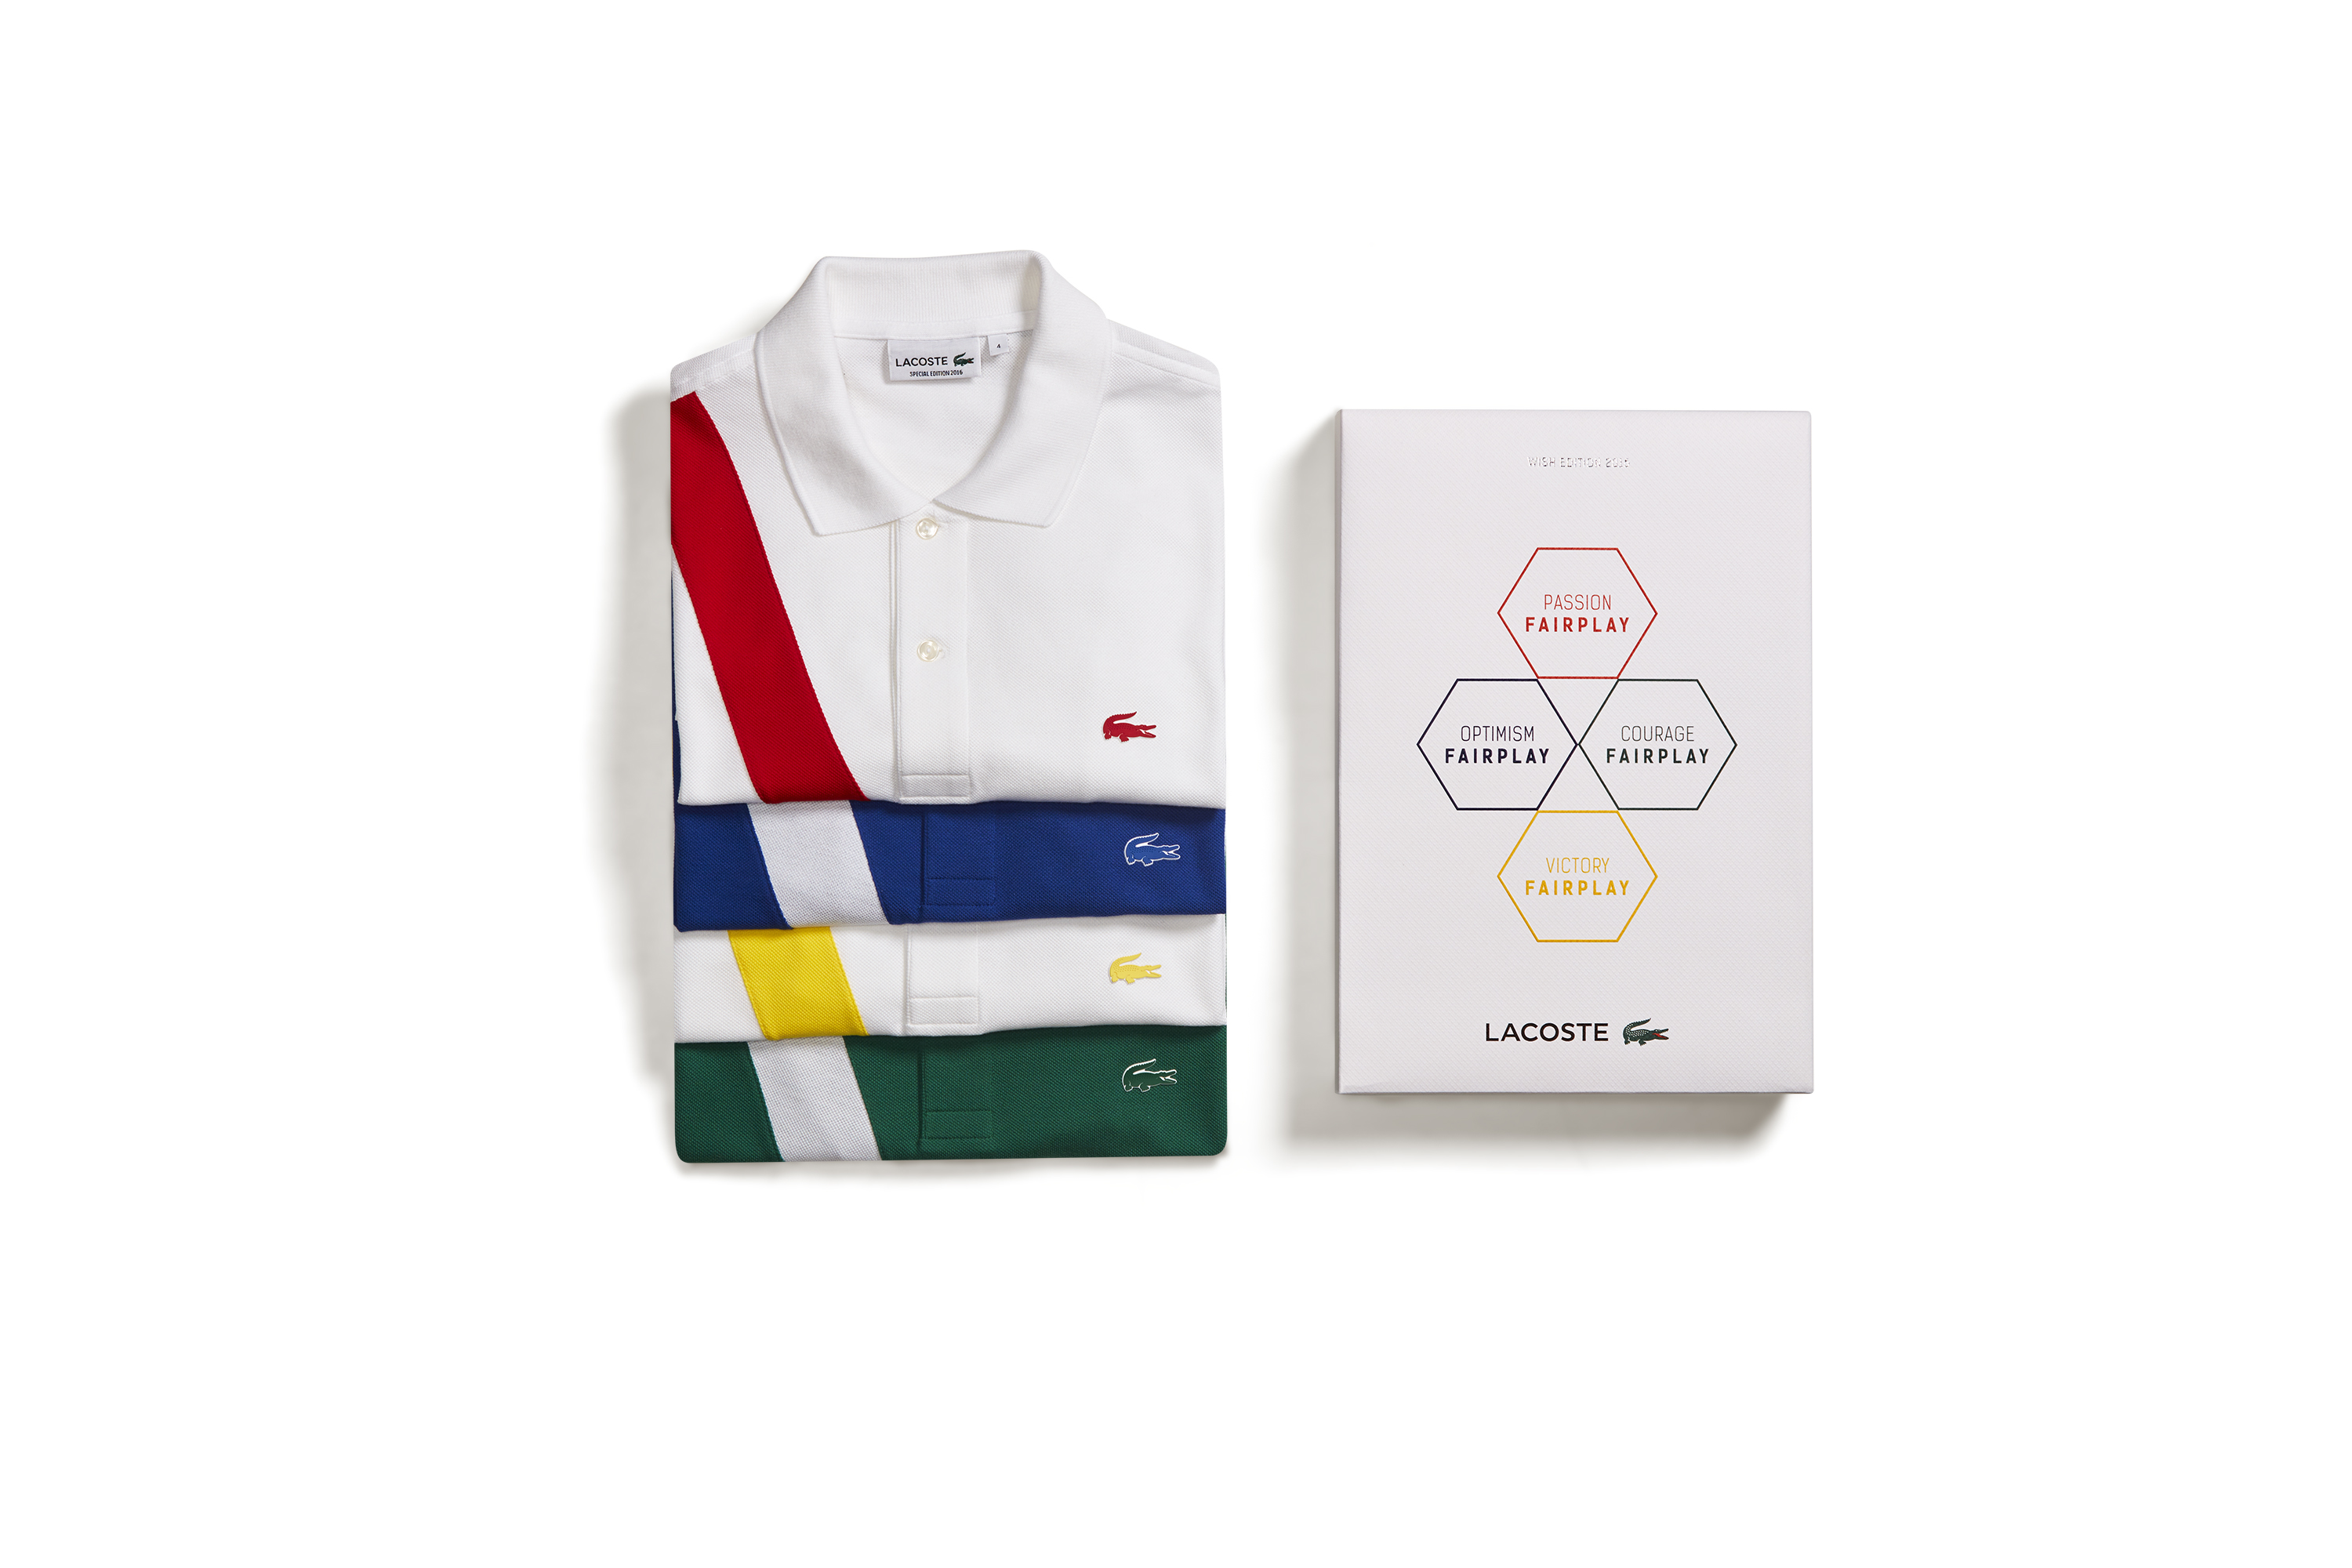 301537_666484_20161103_lacoste_still_wishedition27398